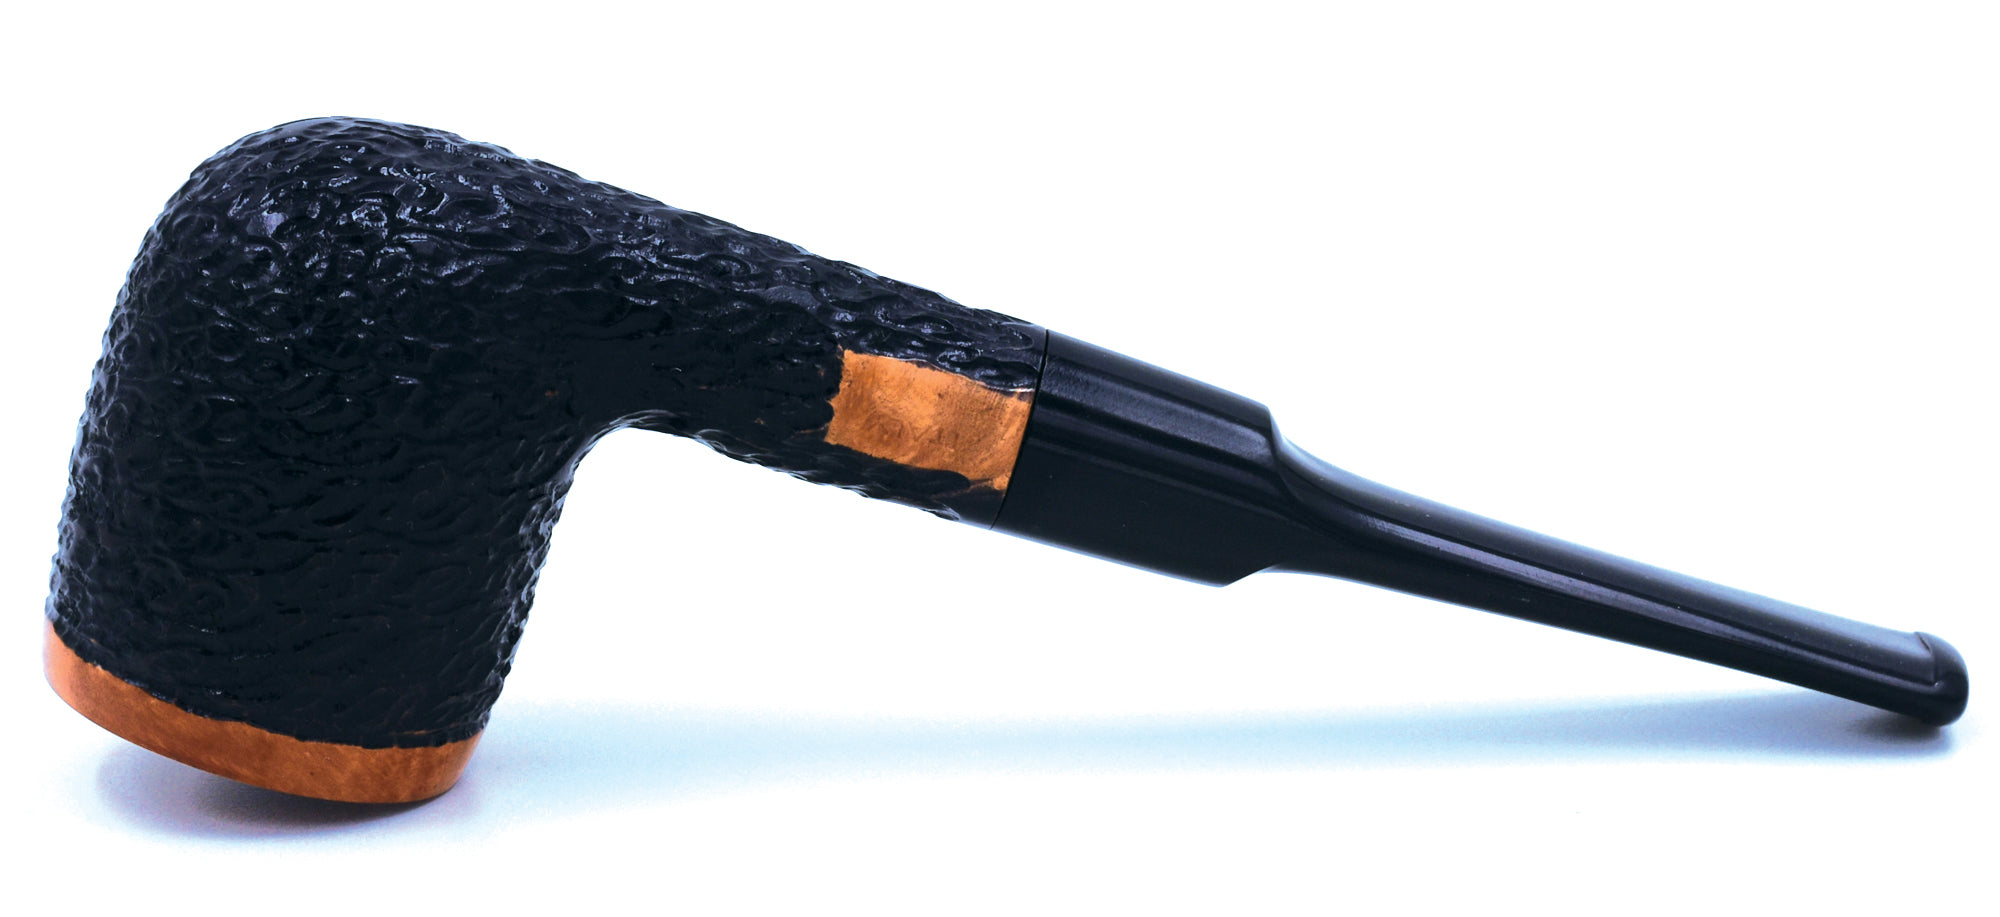 LEGENDEX® TOSCANINI* 9 MM Filtered Briar Smoking Pipe Made In Italy 01-08-412